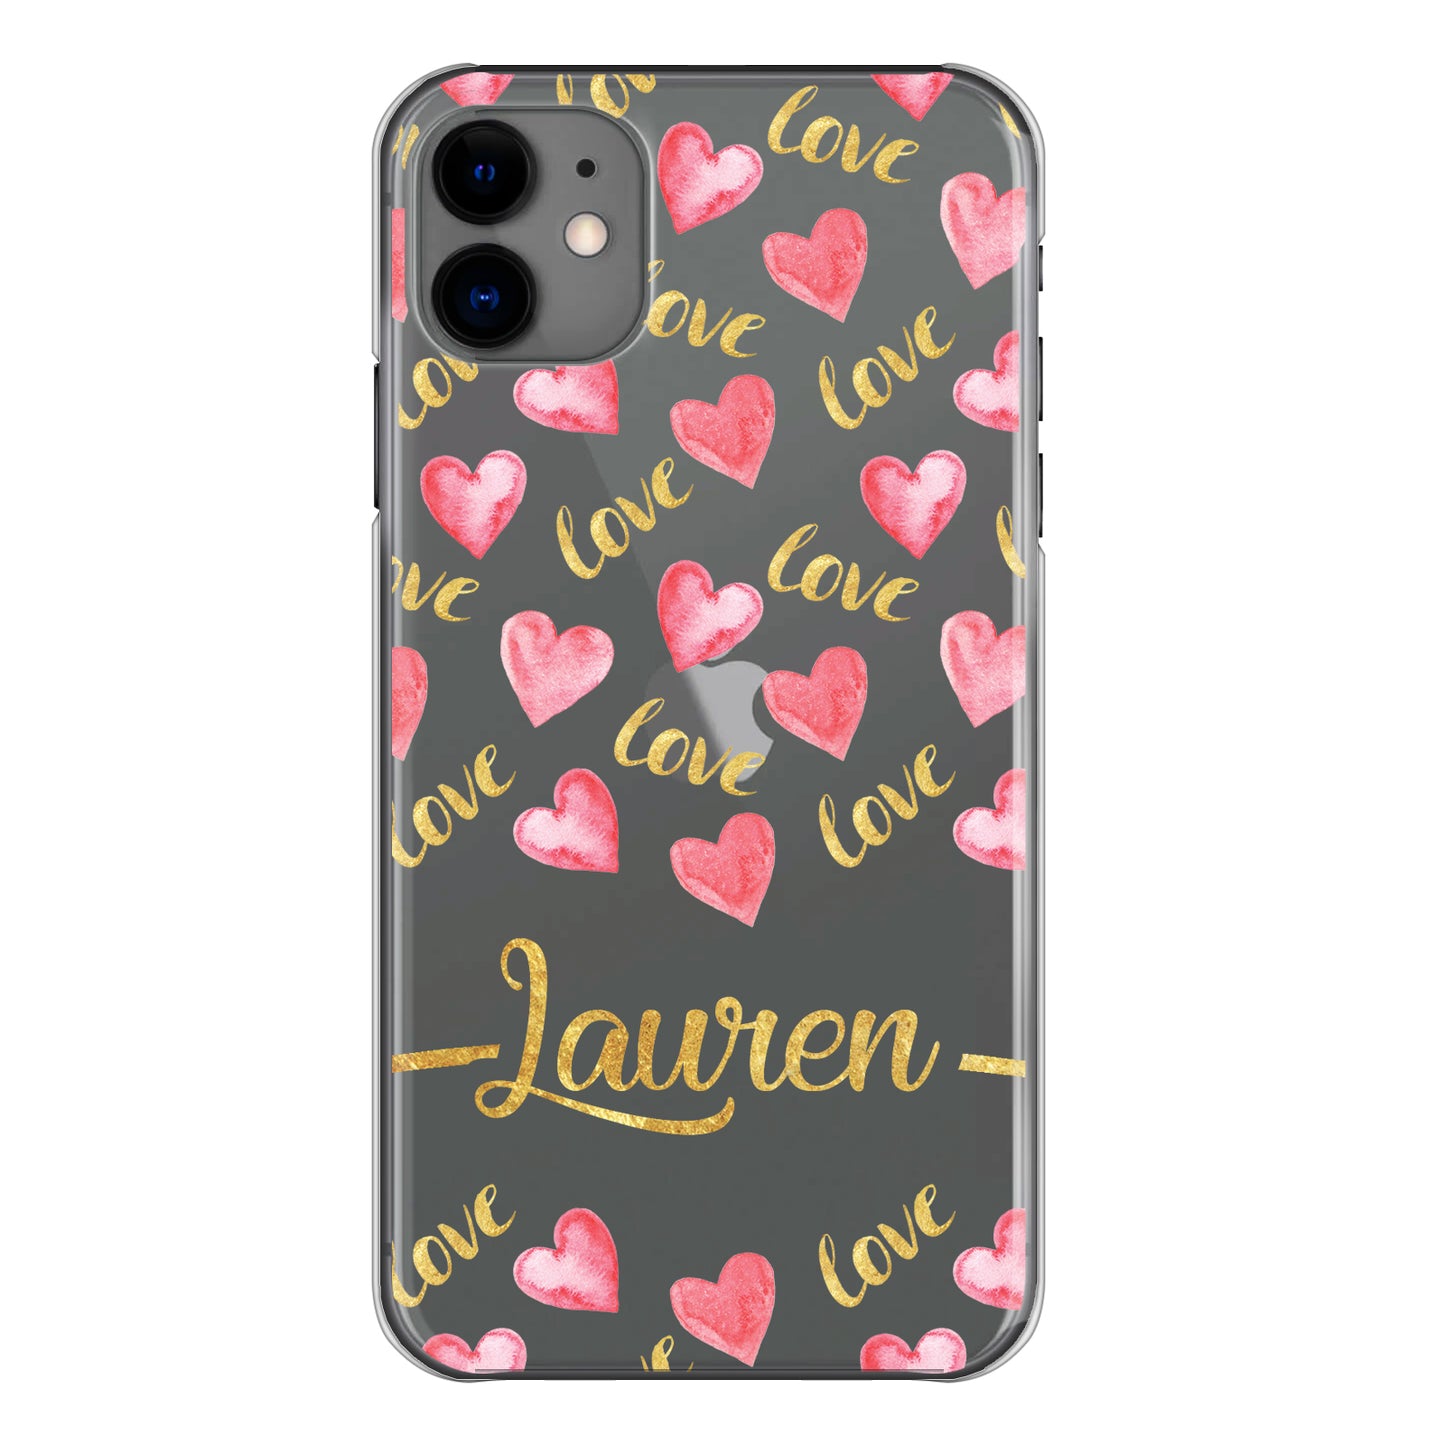 Personalised LG Phone Hard Case with Love Hearts and Cute Gold Text